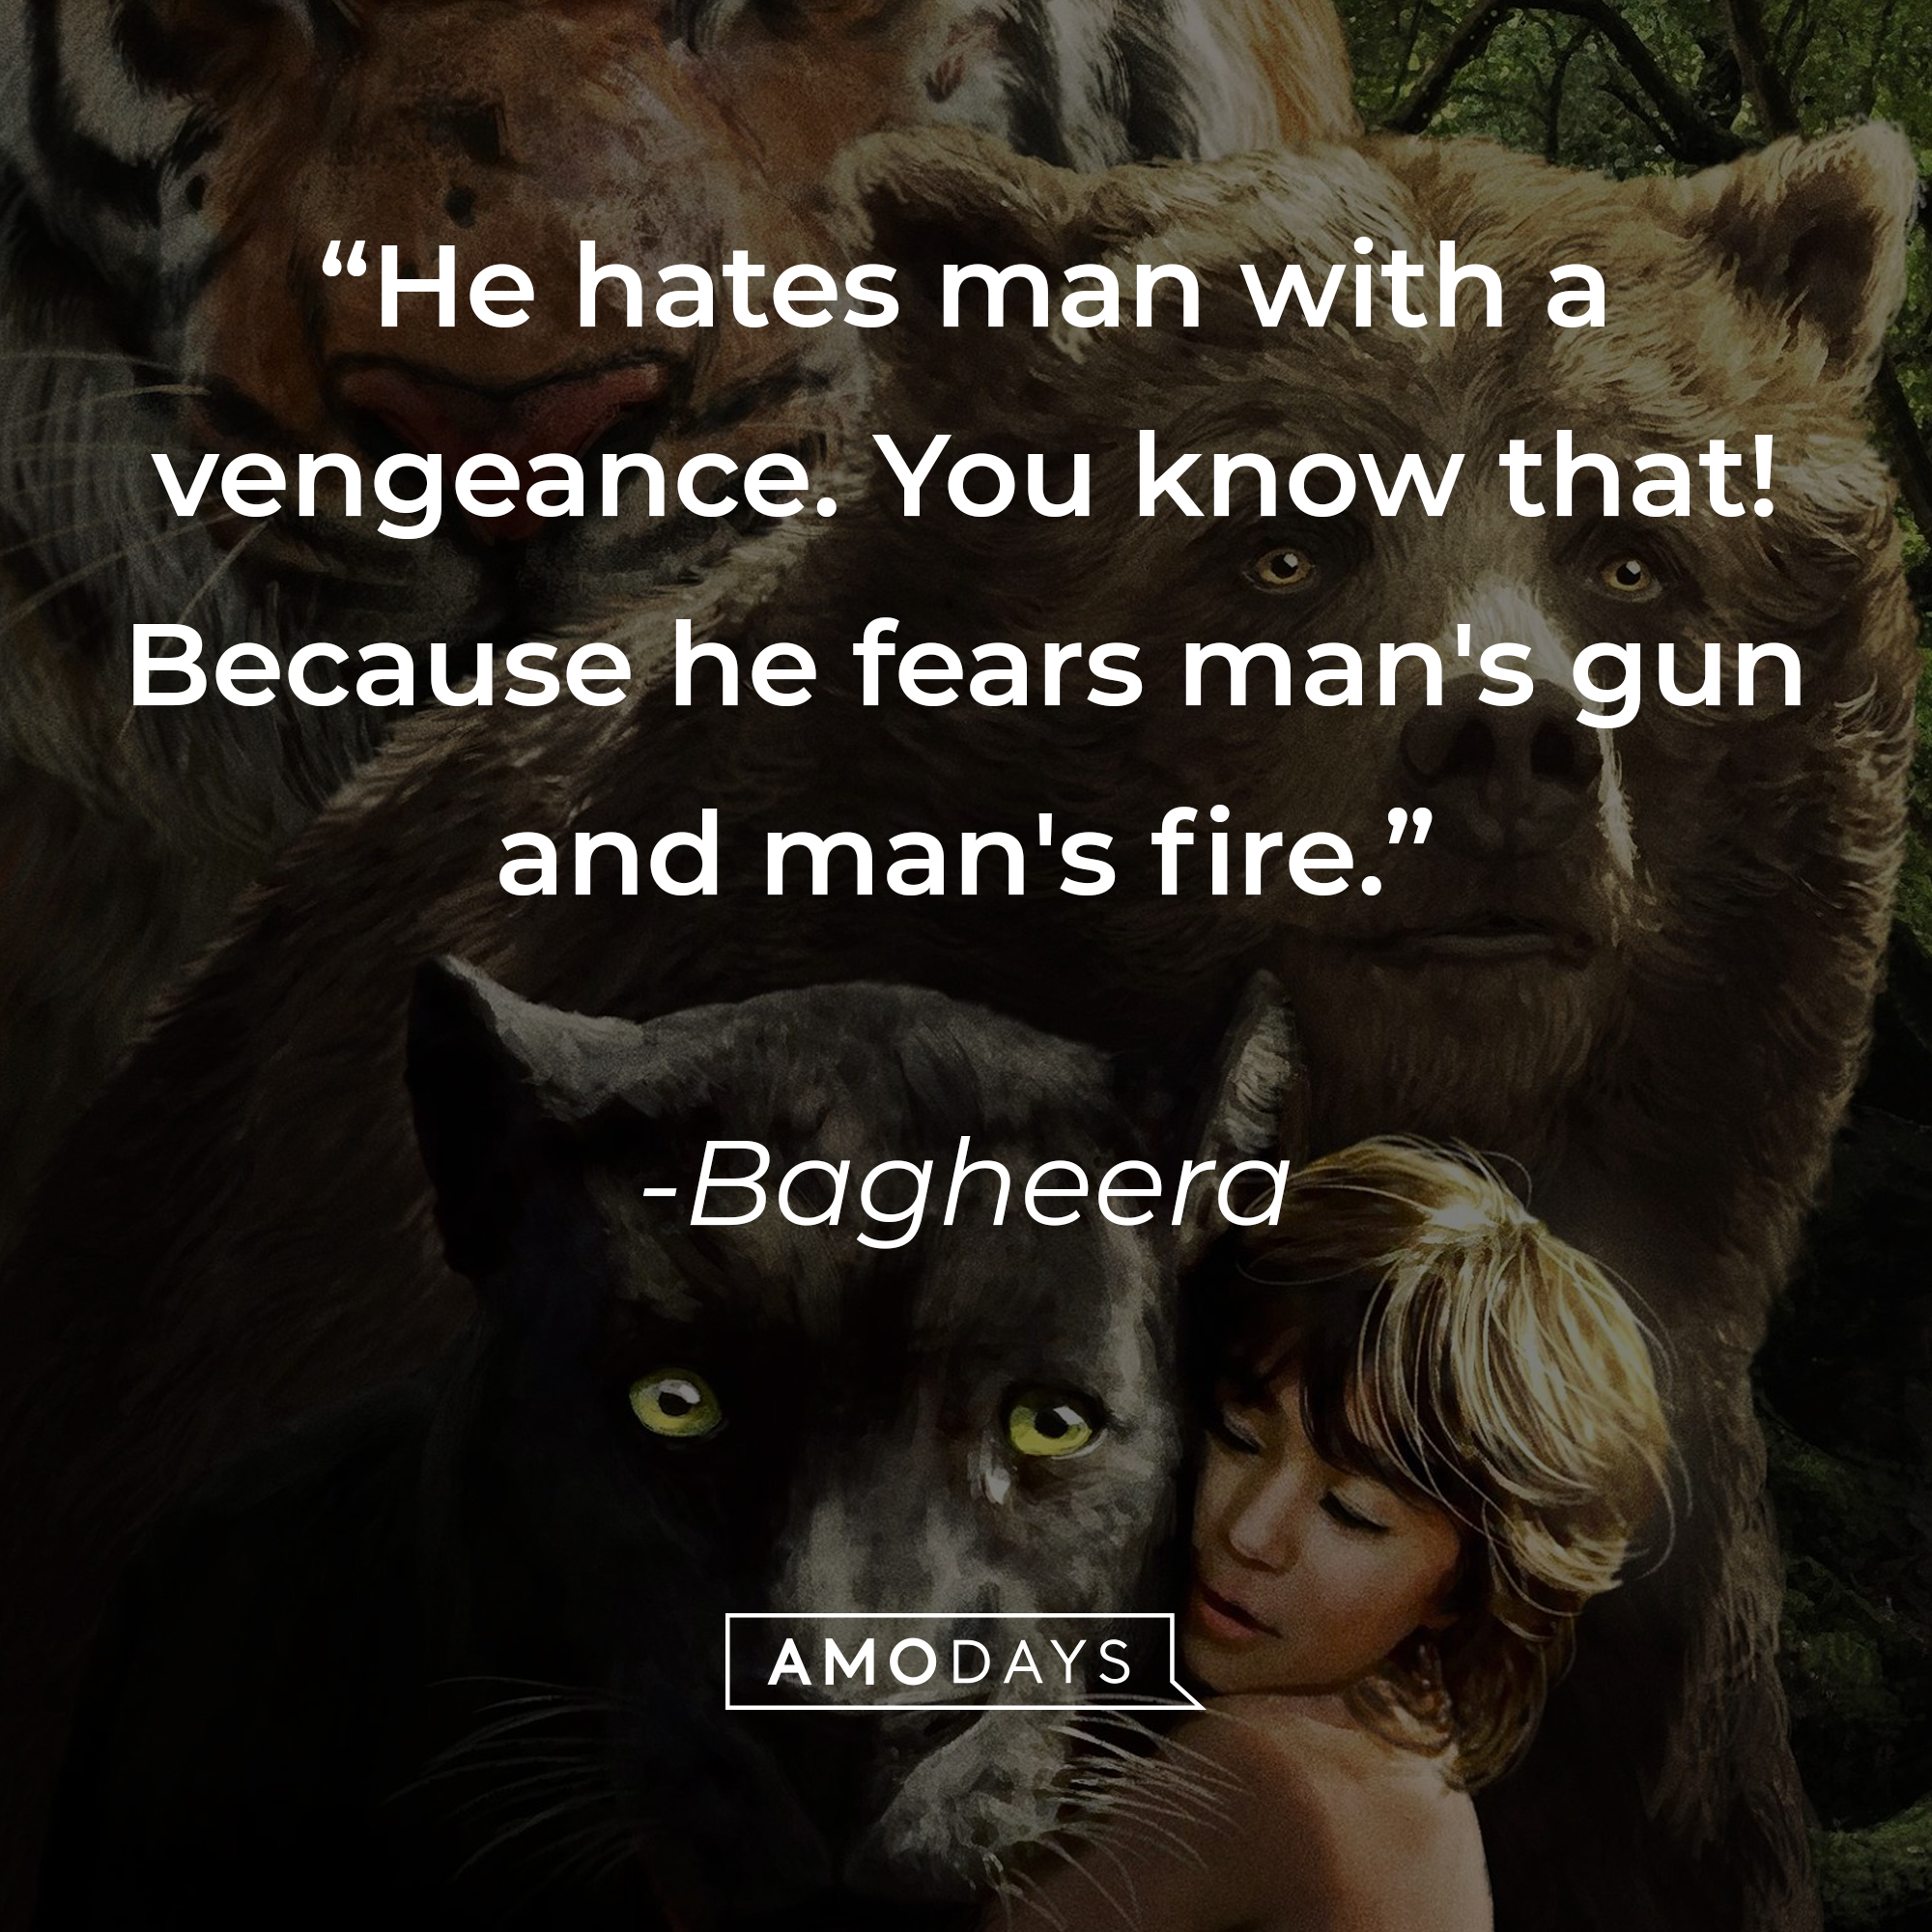 Bagheera's quote: "He hates man with a vengeance. You know that! Because he fears man's gun and man's fire." | Source: facebook.com/DisneyJungleBook